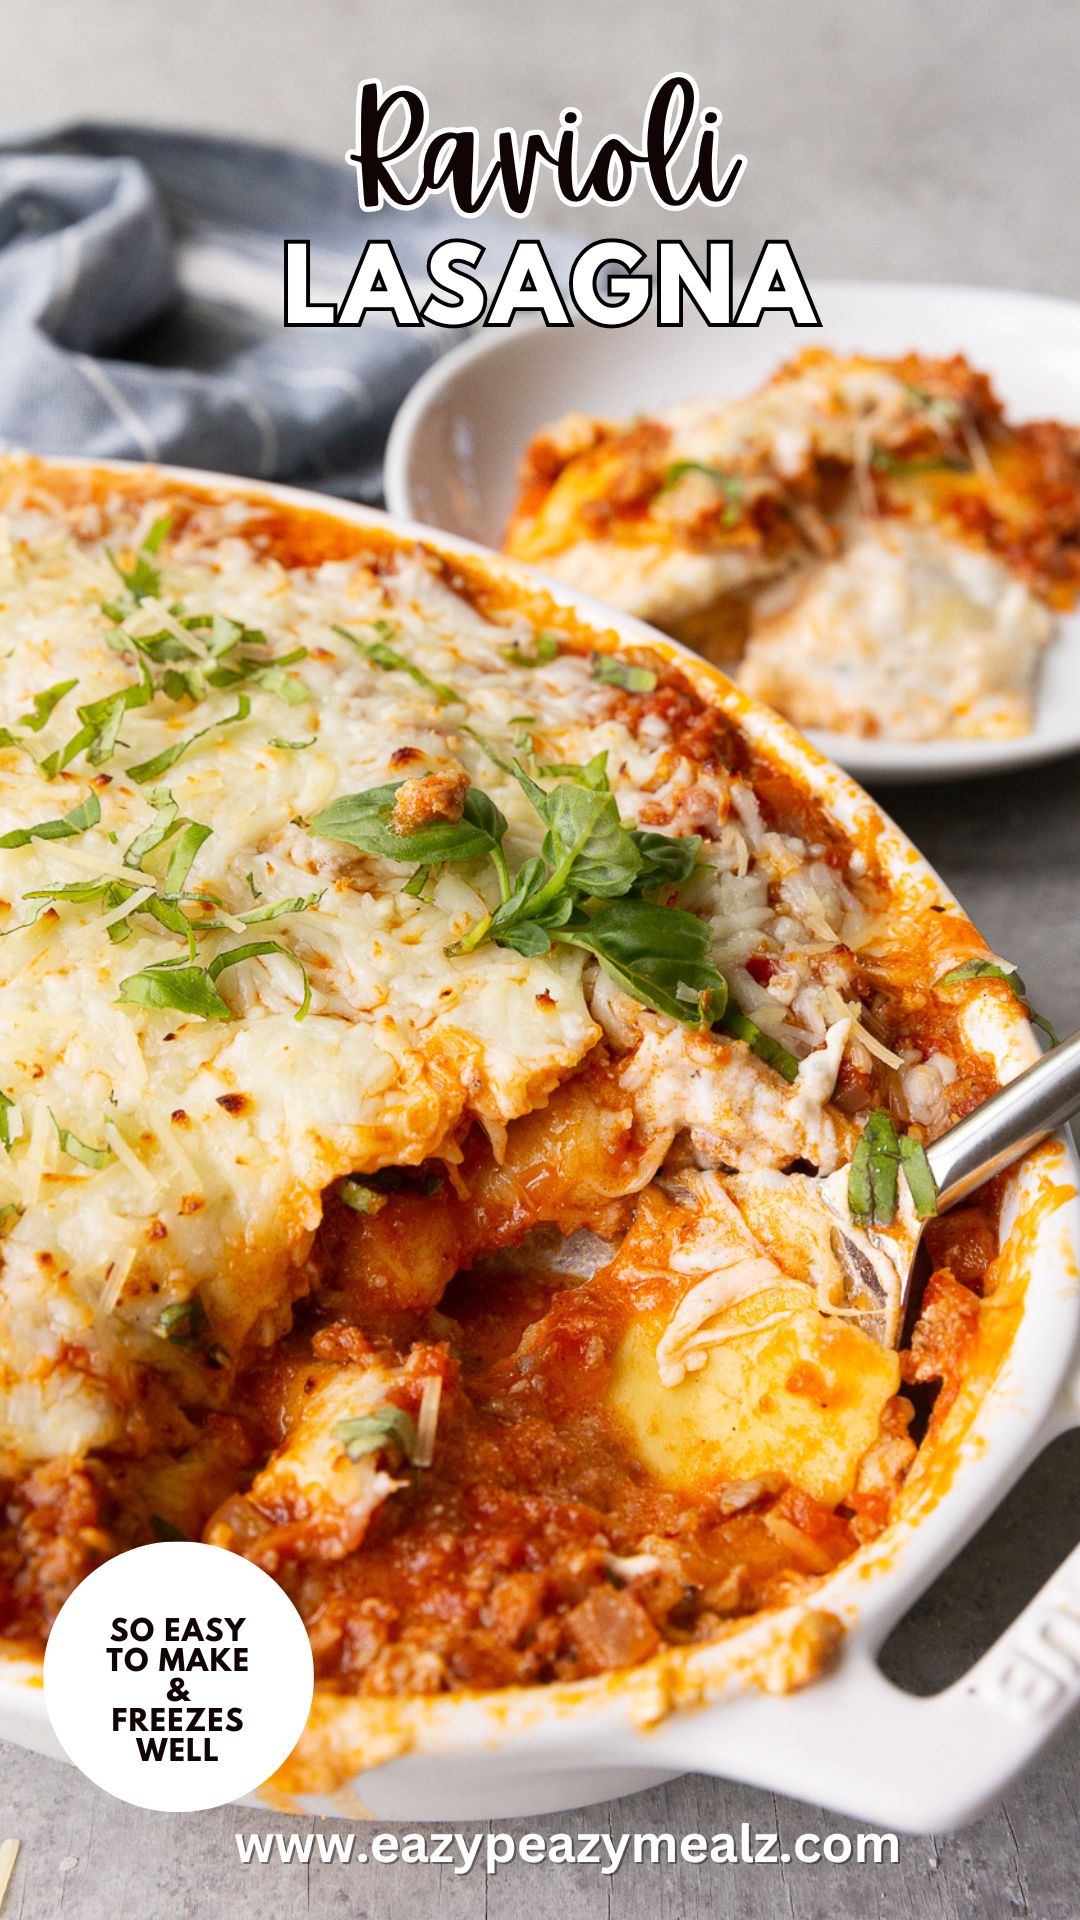 How to make lazy lasagna, ravioli lasagna gives you all the flavor with half the work. 